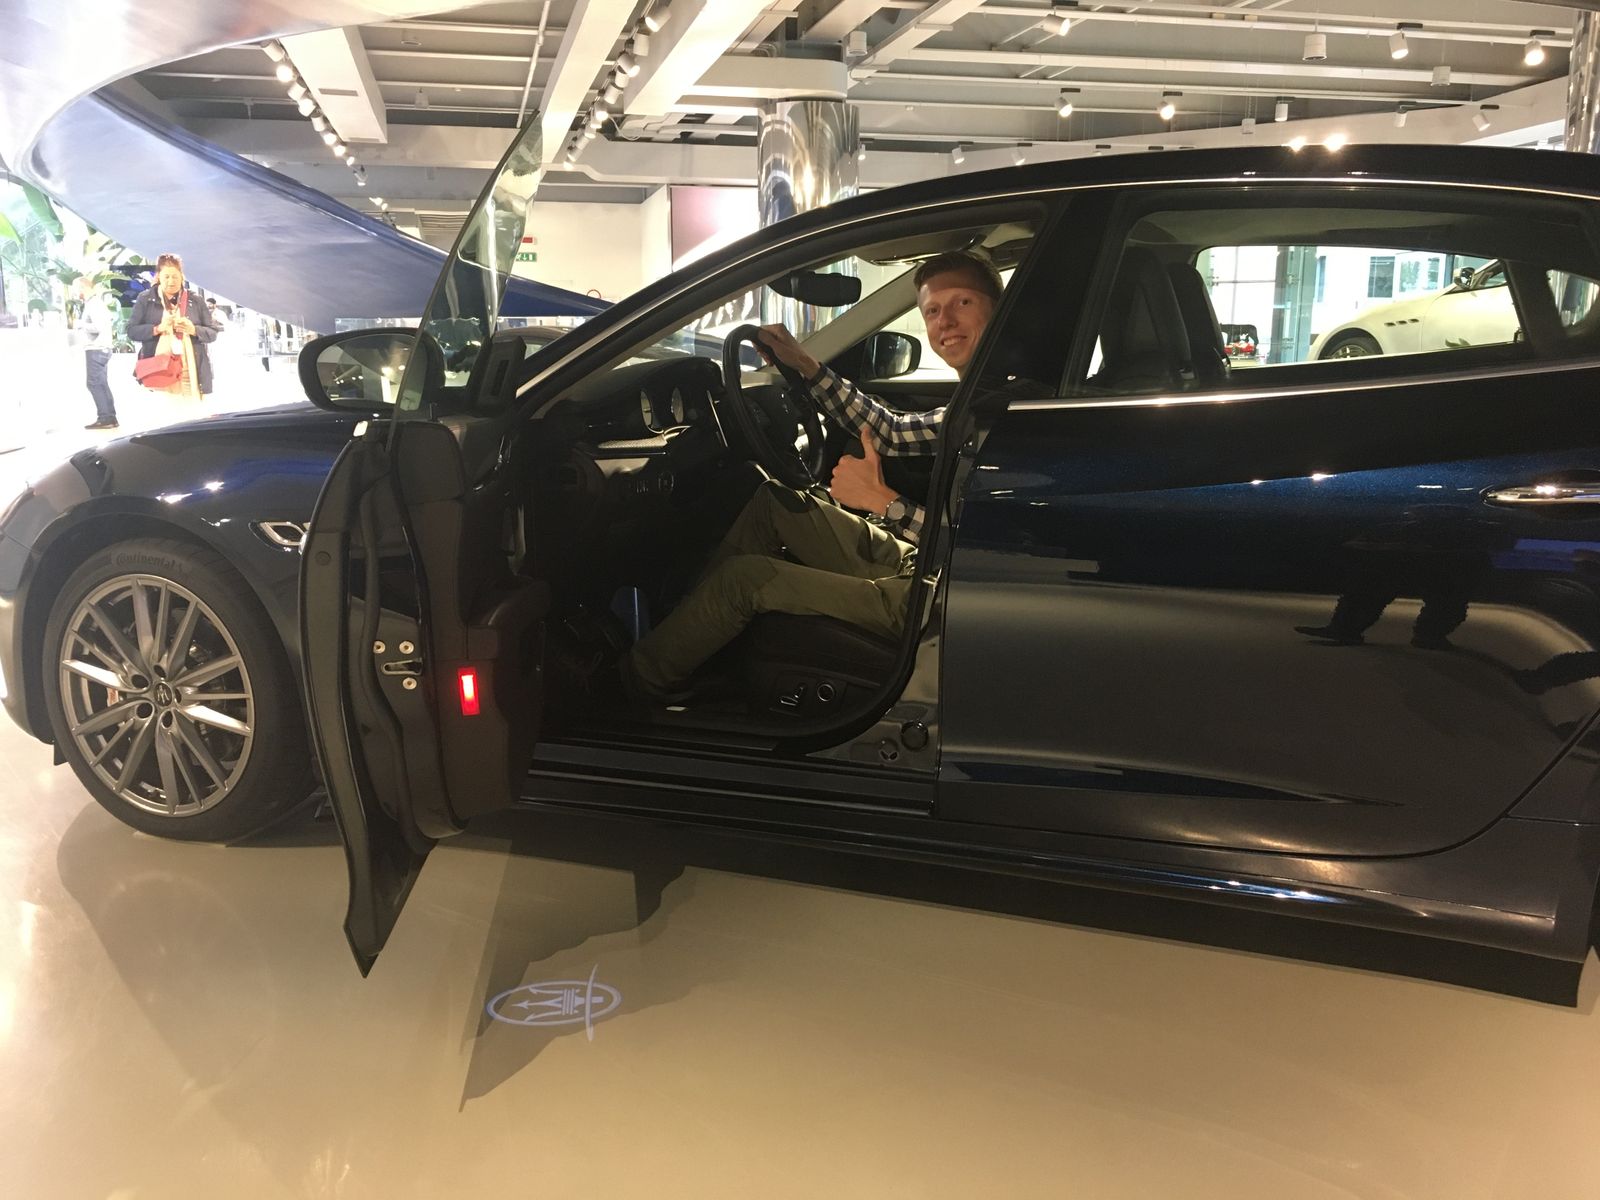 Sitting in Maserati Ghibli for the first time - at the historical Maserati factory (Modena)